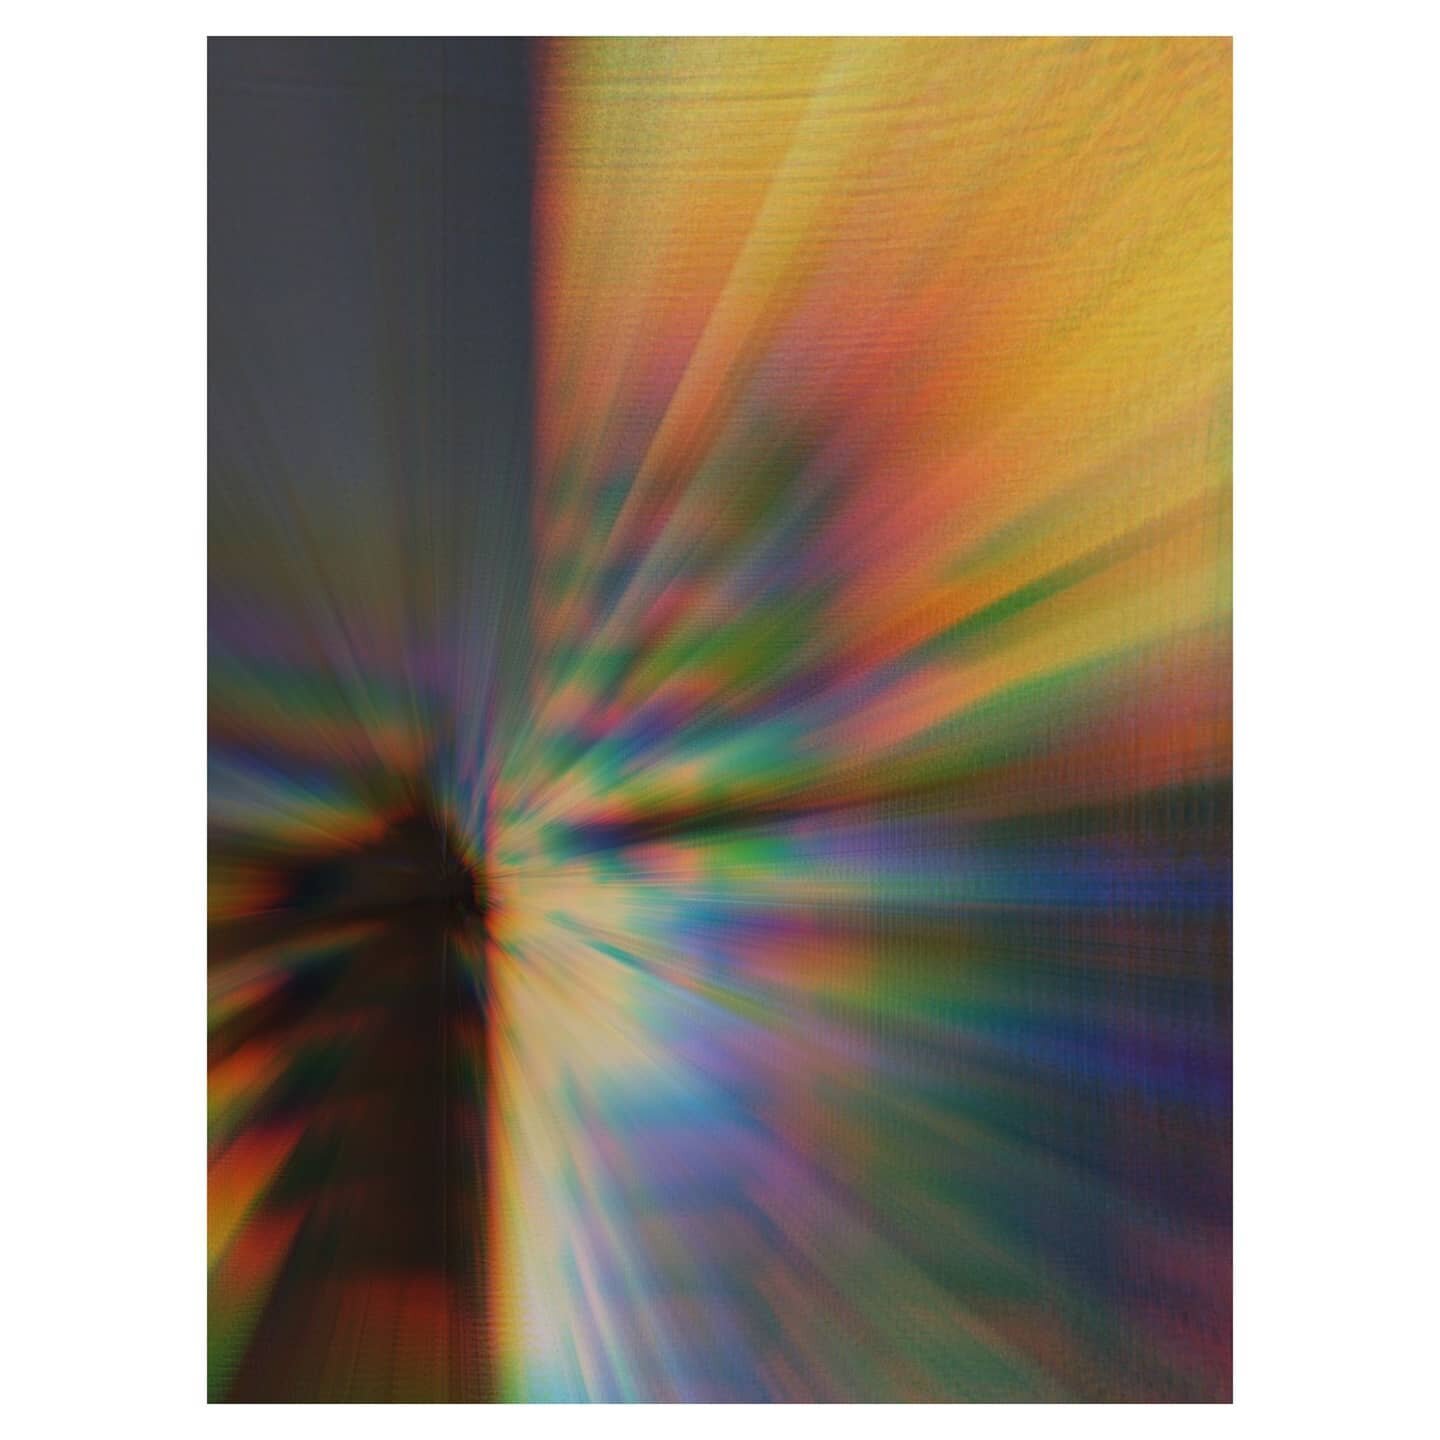 💥💥💥🖼️🖼️🖼️ #breaking #images
.
.
. 
#pictorial #distortion #glitch #glitchart #refraction